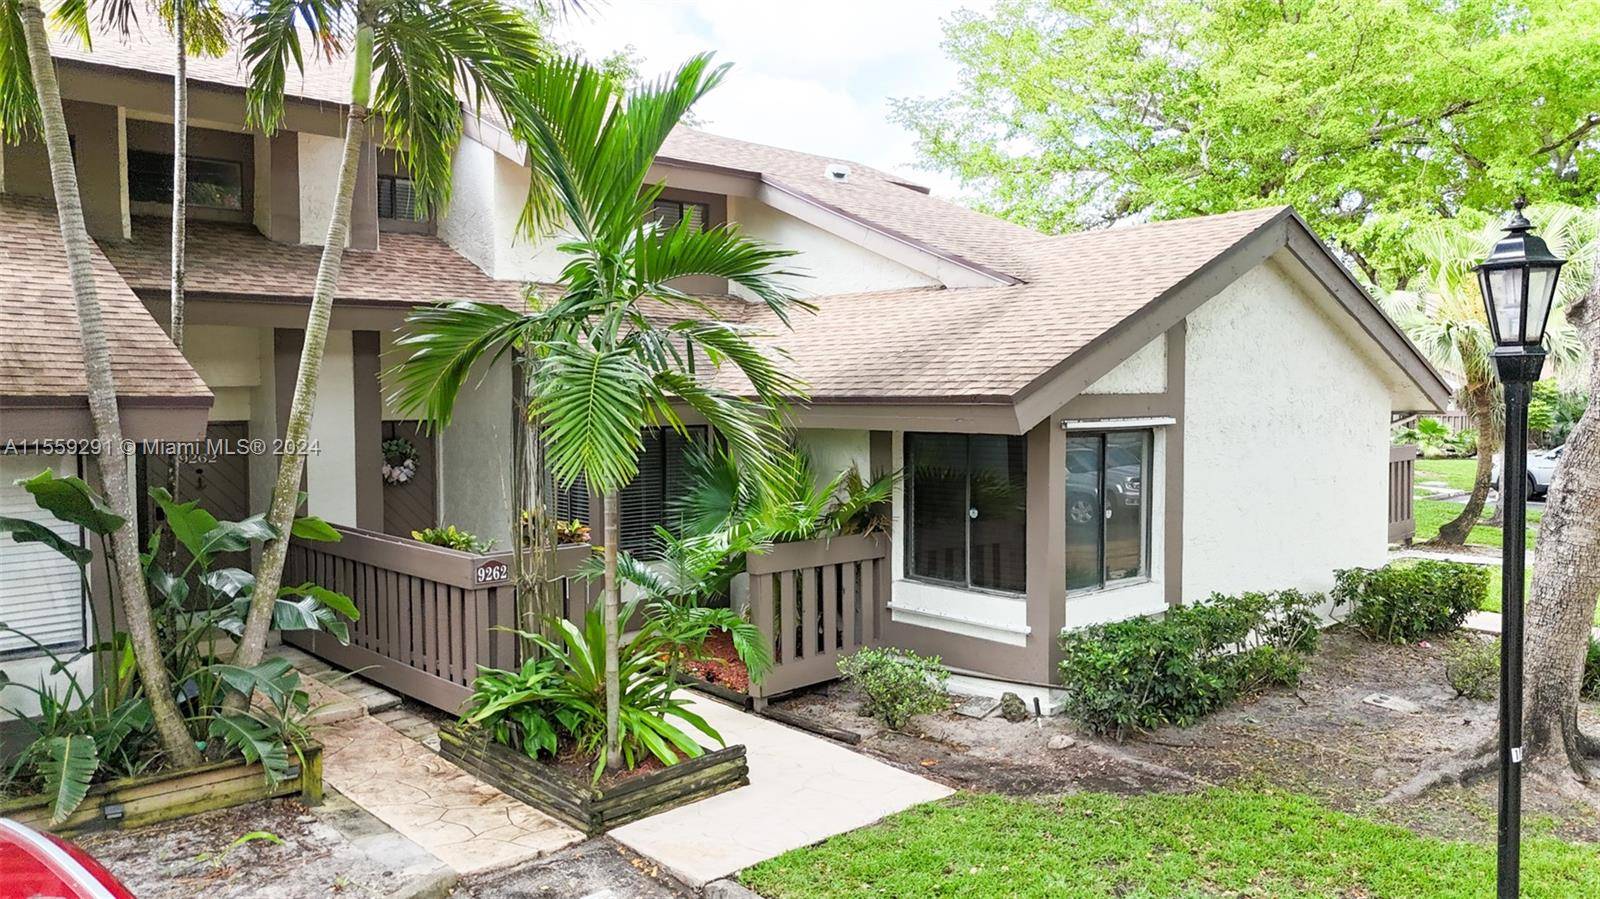 Located in the heart of Plantation within the Cedar Landing community, this property offers convenient access to nearby shops, restaurants, and highways, ensuring ease of travel and access to amenities.